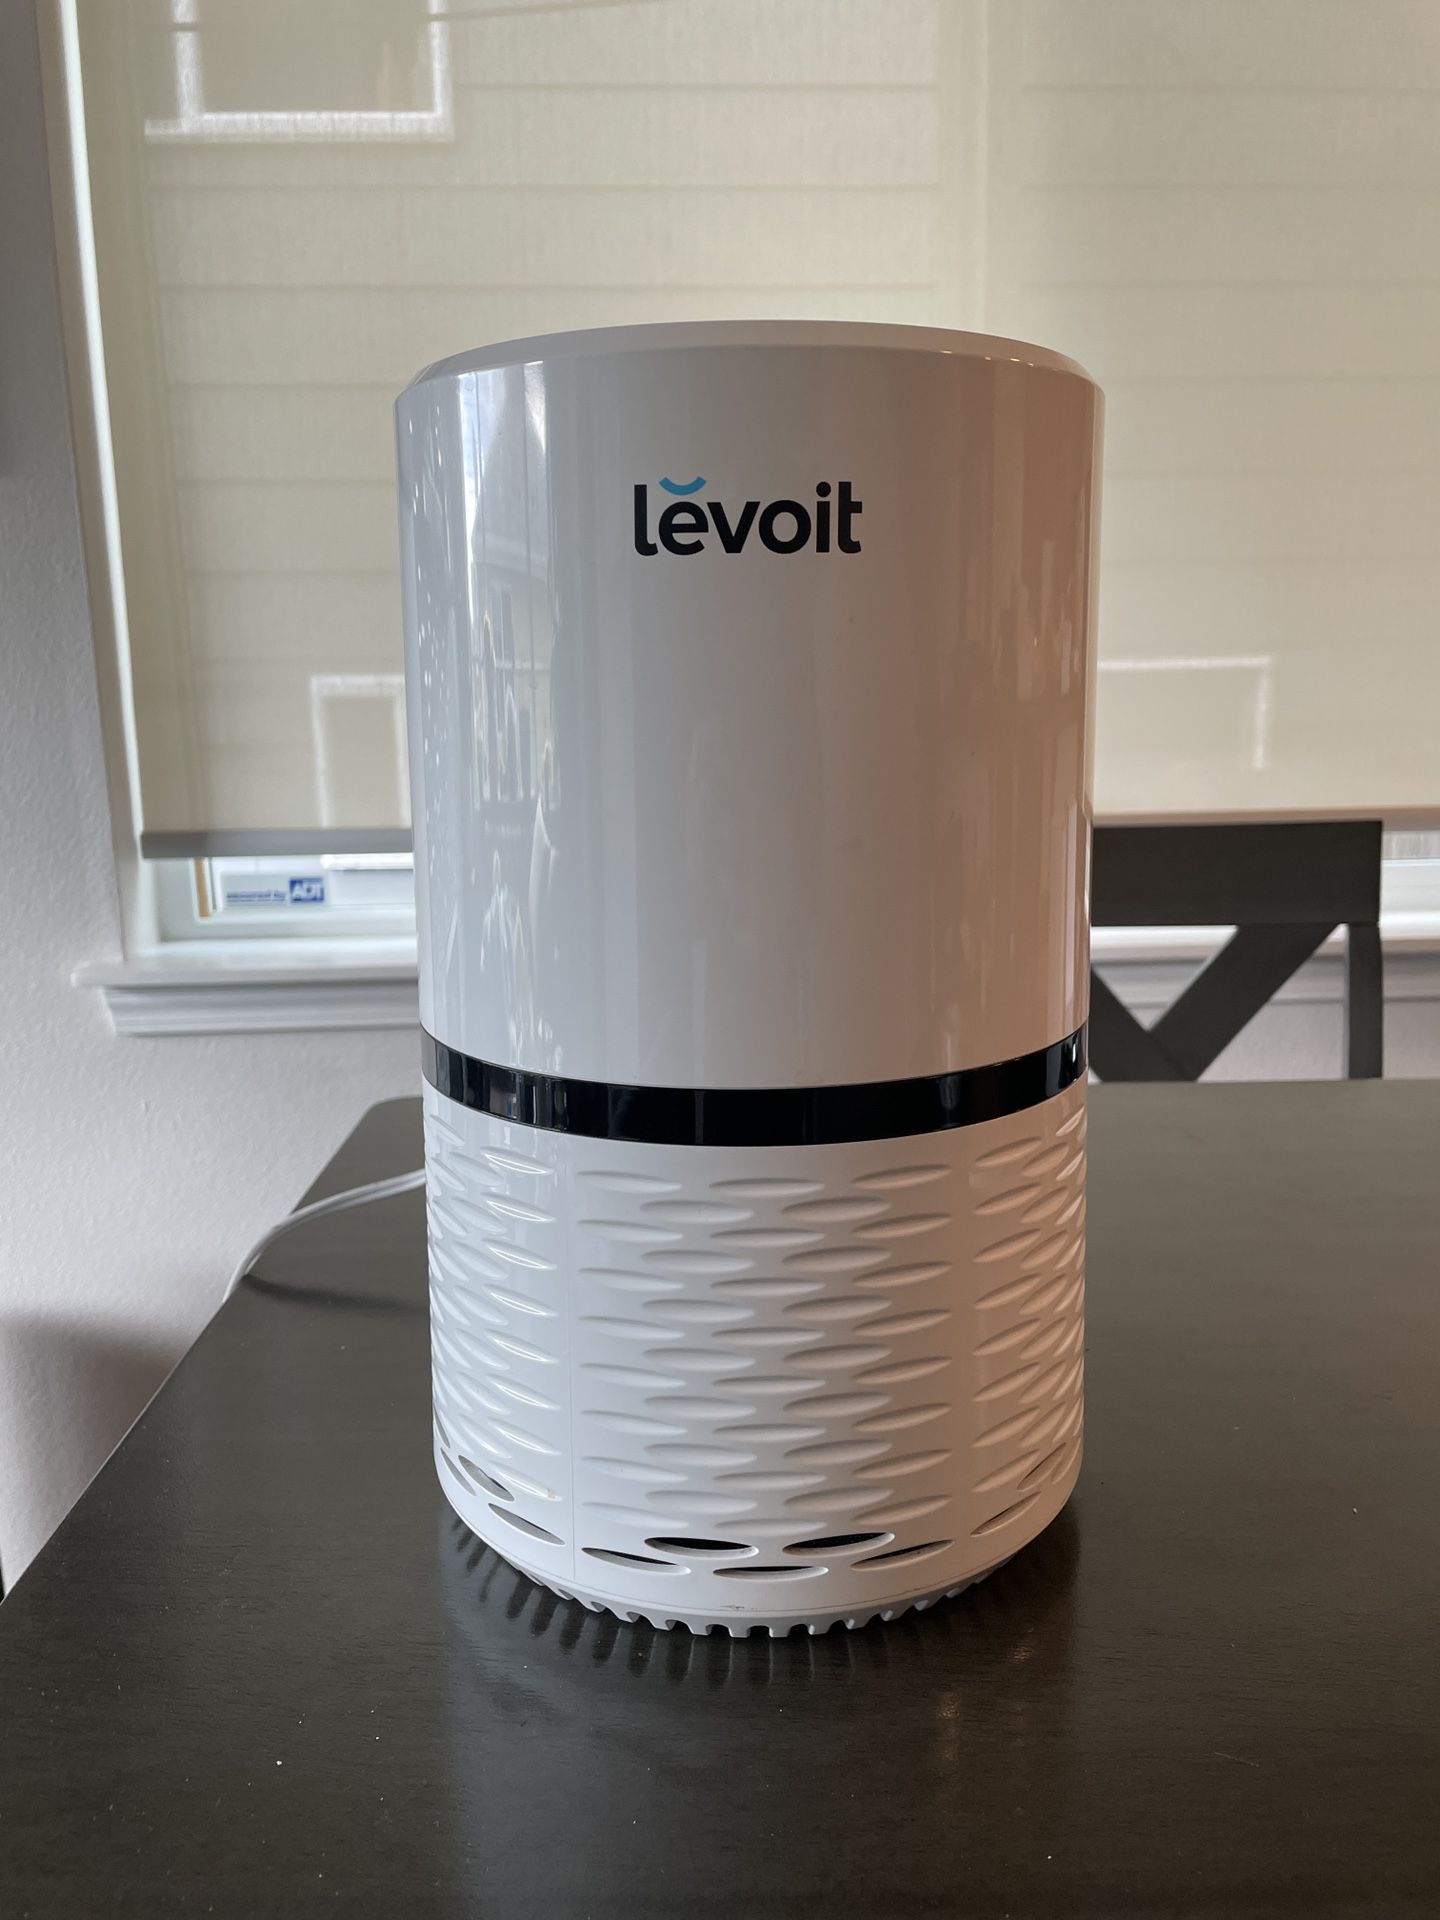 LEVOIT Air Purifiers for Home True HEPA Filter for Smoke, Dust, Mold, and Pollen